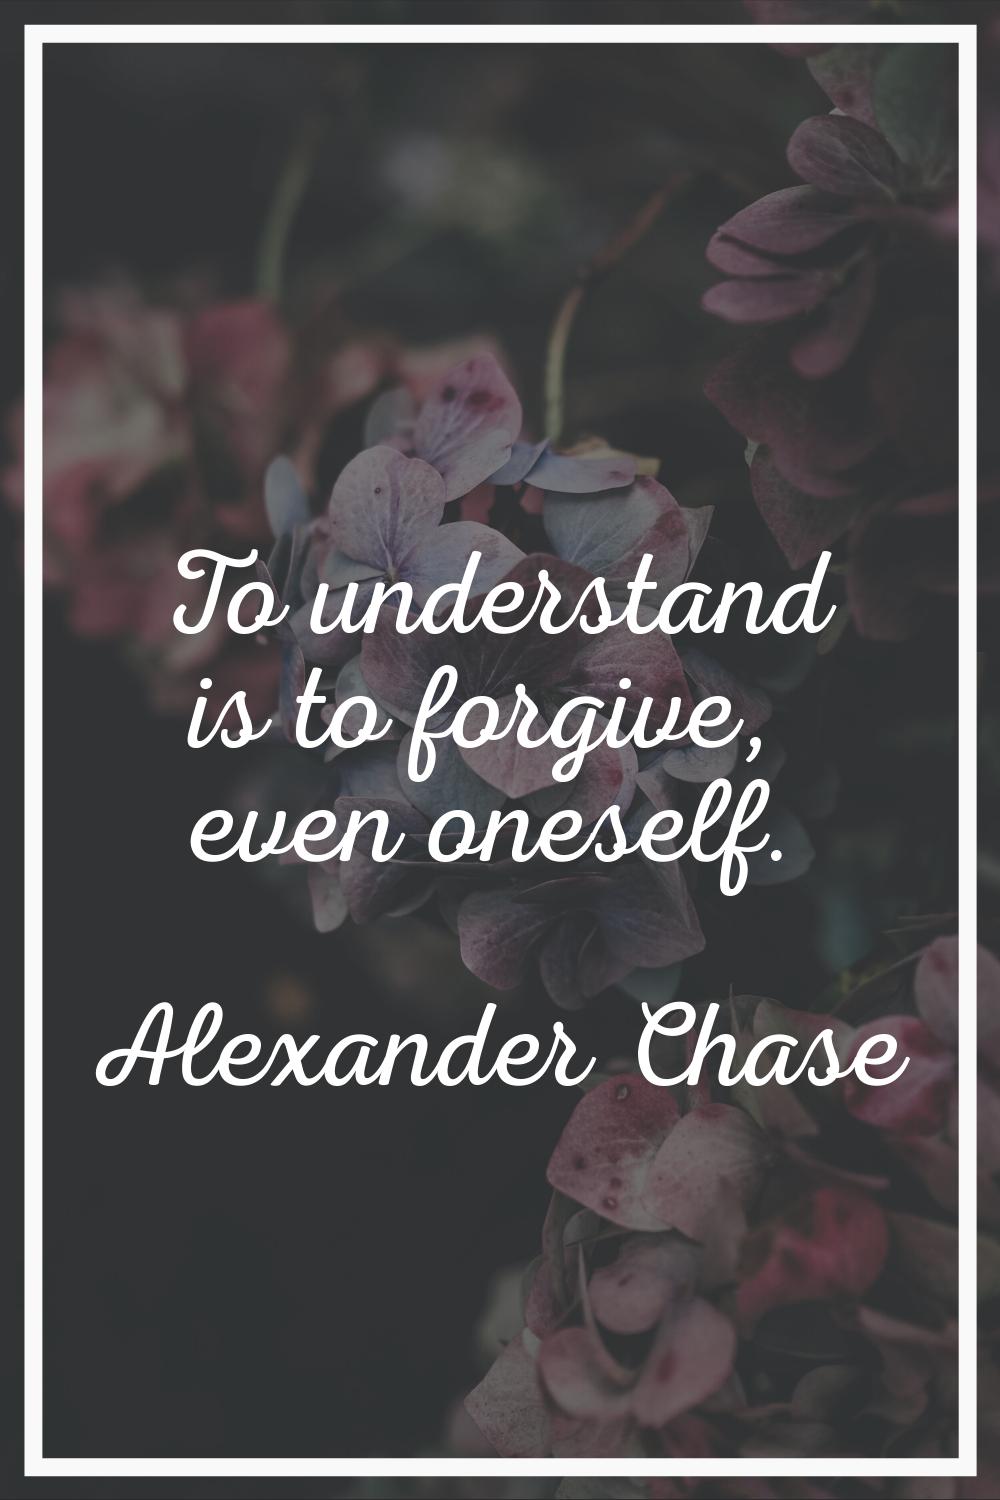 To understand is to forgive, even oneself.